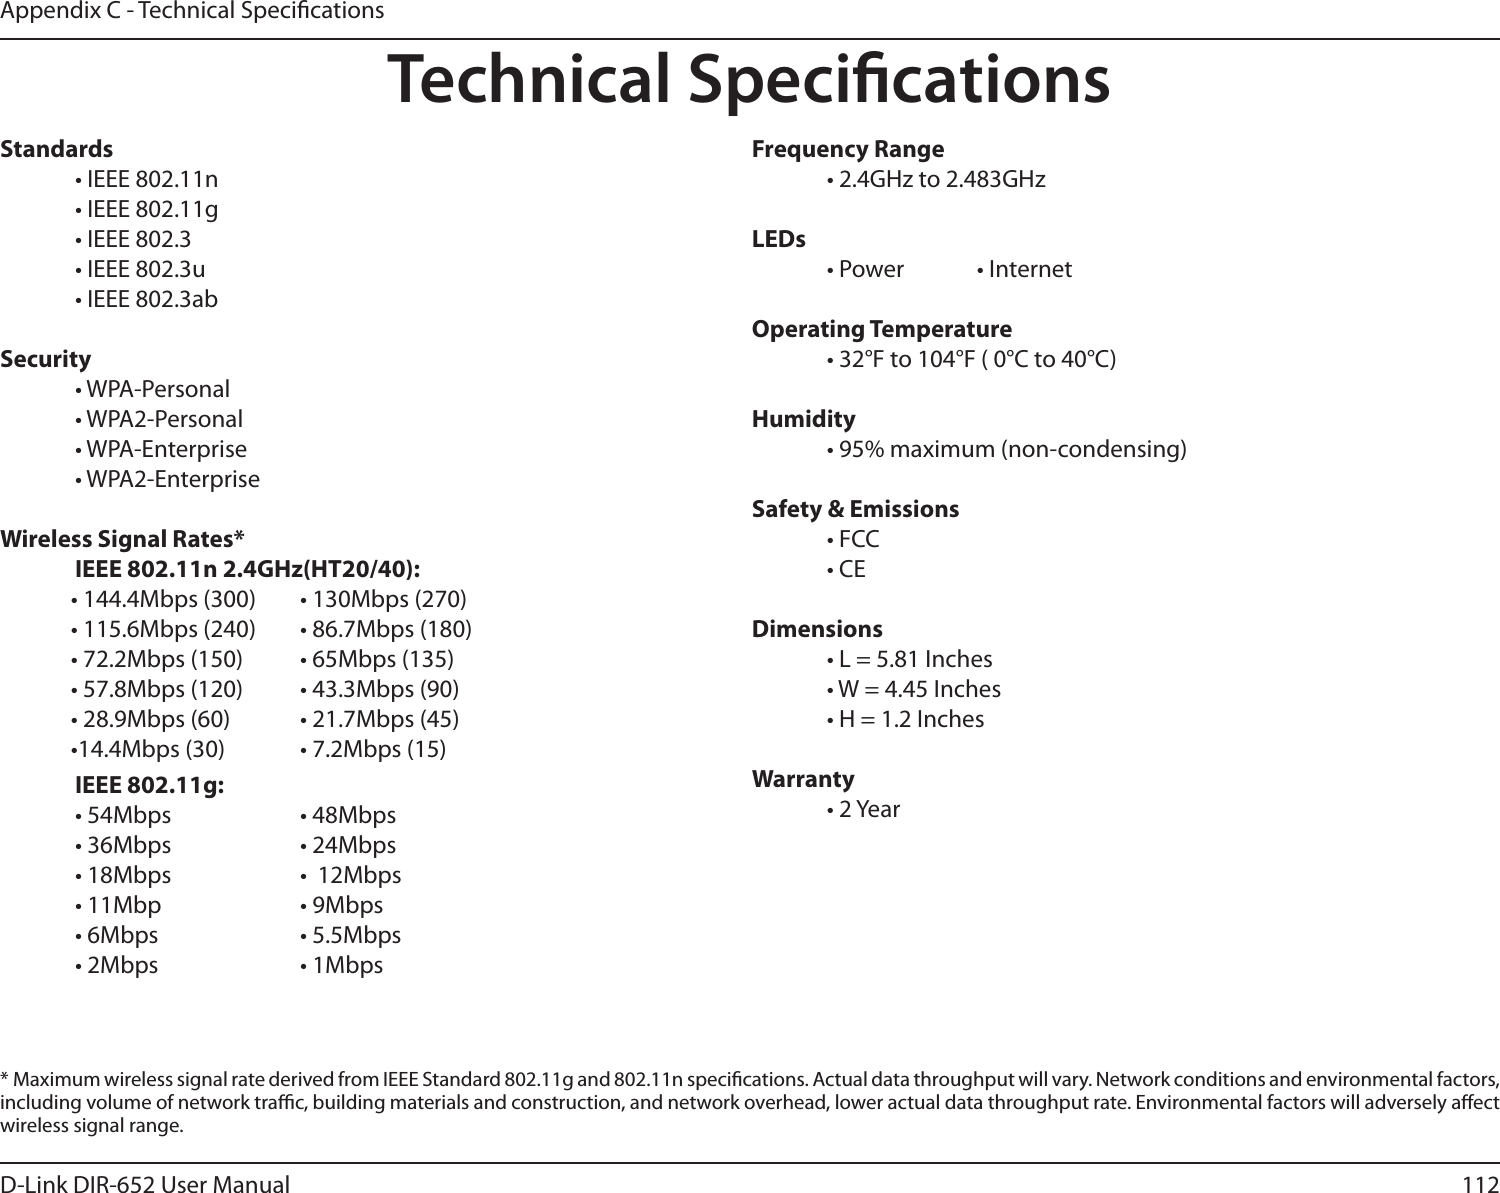 112D-Link DIR-652 User ManualAppendix C - Technical SpecicationsTechnical SpecicationsStandards  • IEEE 802.11n  • IEEE 802.11g  • IEEE 802.3  • IEEE 802.3u  • IEEE 802.3abSecurity  • WPA-Personal  • WPA2-Personal  • WPA-Enterprise  • WPA2-Enterprise Wireless Signal Rates*  IEEE 802.11n 2.4GHz(HT20/40):• 144.4Mbps (300)     • 130Mbps (270)• 115.6Mbps (240)      • 86.7Mbps (180)• 72.2Mbps (150)       • 65Mbps (135)• 57.8Mbps (120)       • 43.3Mbps (90)• 28.9Mbps (60)  • 21.7Mbps (45)•14.4Mbps (30)  • 7.2Mbps (15)  IEEE 802.11g:  • 54Mbps            • 48Mbps   • 36Mbps      • 24Mbps   • 18Mbps    •  12Mbps   • 11Mbp    • 9Mbps  • 6Mbps      • 5.5Mbps  • 2Mbps      • 1Mbps        Frequency Range  • 2.4GHz to 2.483GHzLEDs  • Power   • Internet     Operating Temperature  • 32°F to 104°F ( 0°C to 40°C)Humidity  • 95% maximum (non-condensing)Safety &amp; Emissions  • FCC  • CEDimensions  • L = 5.81 Inches  • W = 4.45 Inches  • H = 1.2 InchesWarranty  • 2 Year*  Maximum wireless signal rate derived from IEEE Standard 802.11g and 802.11n specications. Actual data throughput will vary. Network conditions and environmental factors, including volume of network trac, building materials and construction, and network overhead, lower actual data throughput rate. Environmental factors will adversely aect wireless signal range.